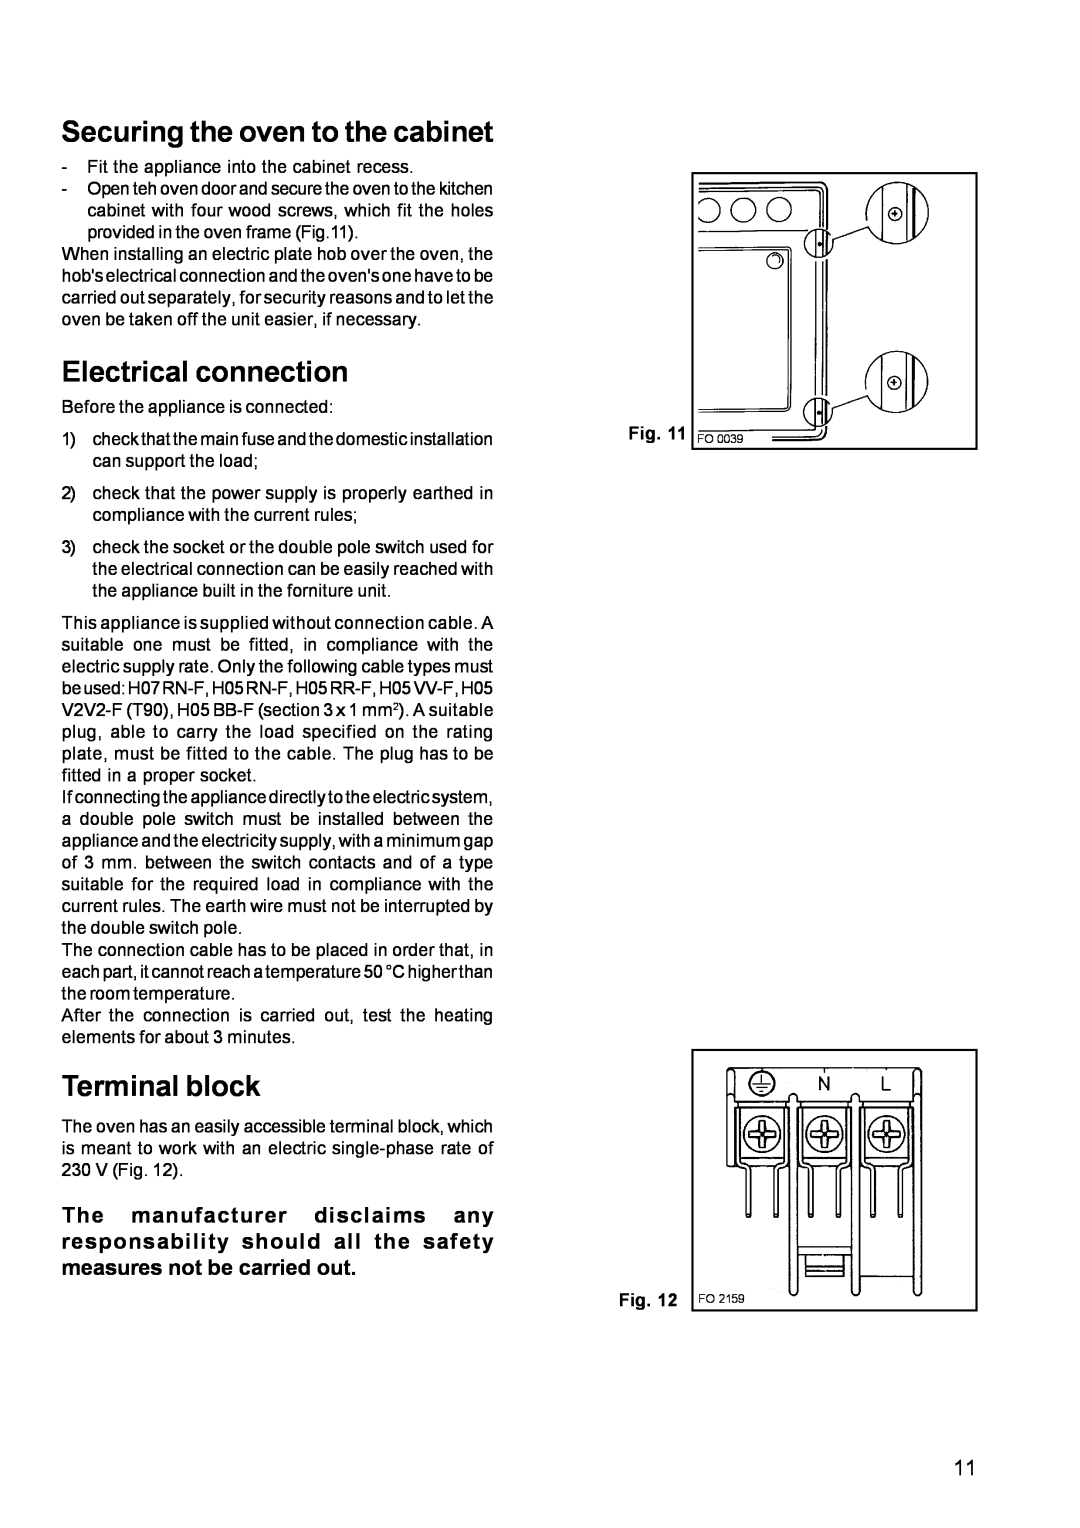 Zanussi ZOB 652, ZOB 641 manual Securing the oven to the cabinet, Electrical connection, Terminal block 